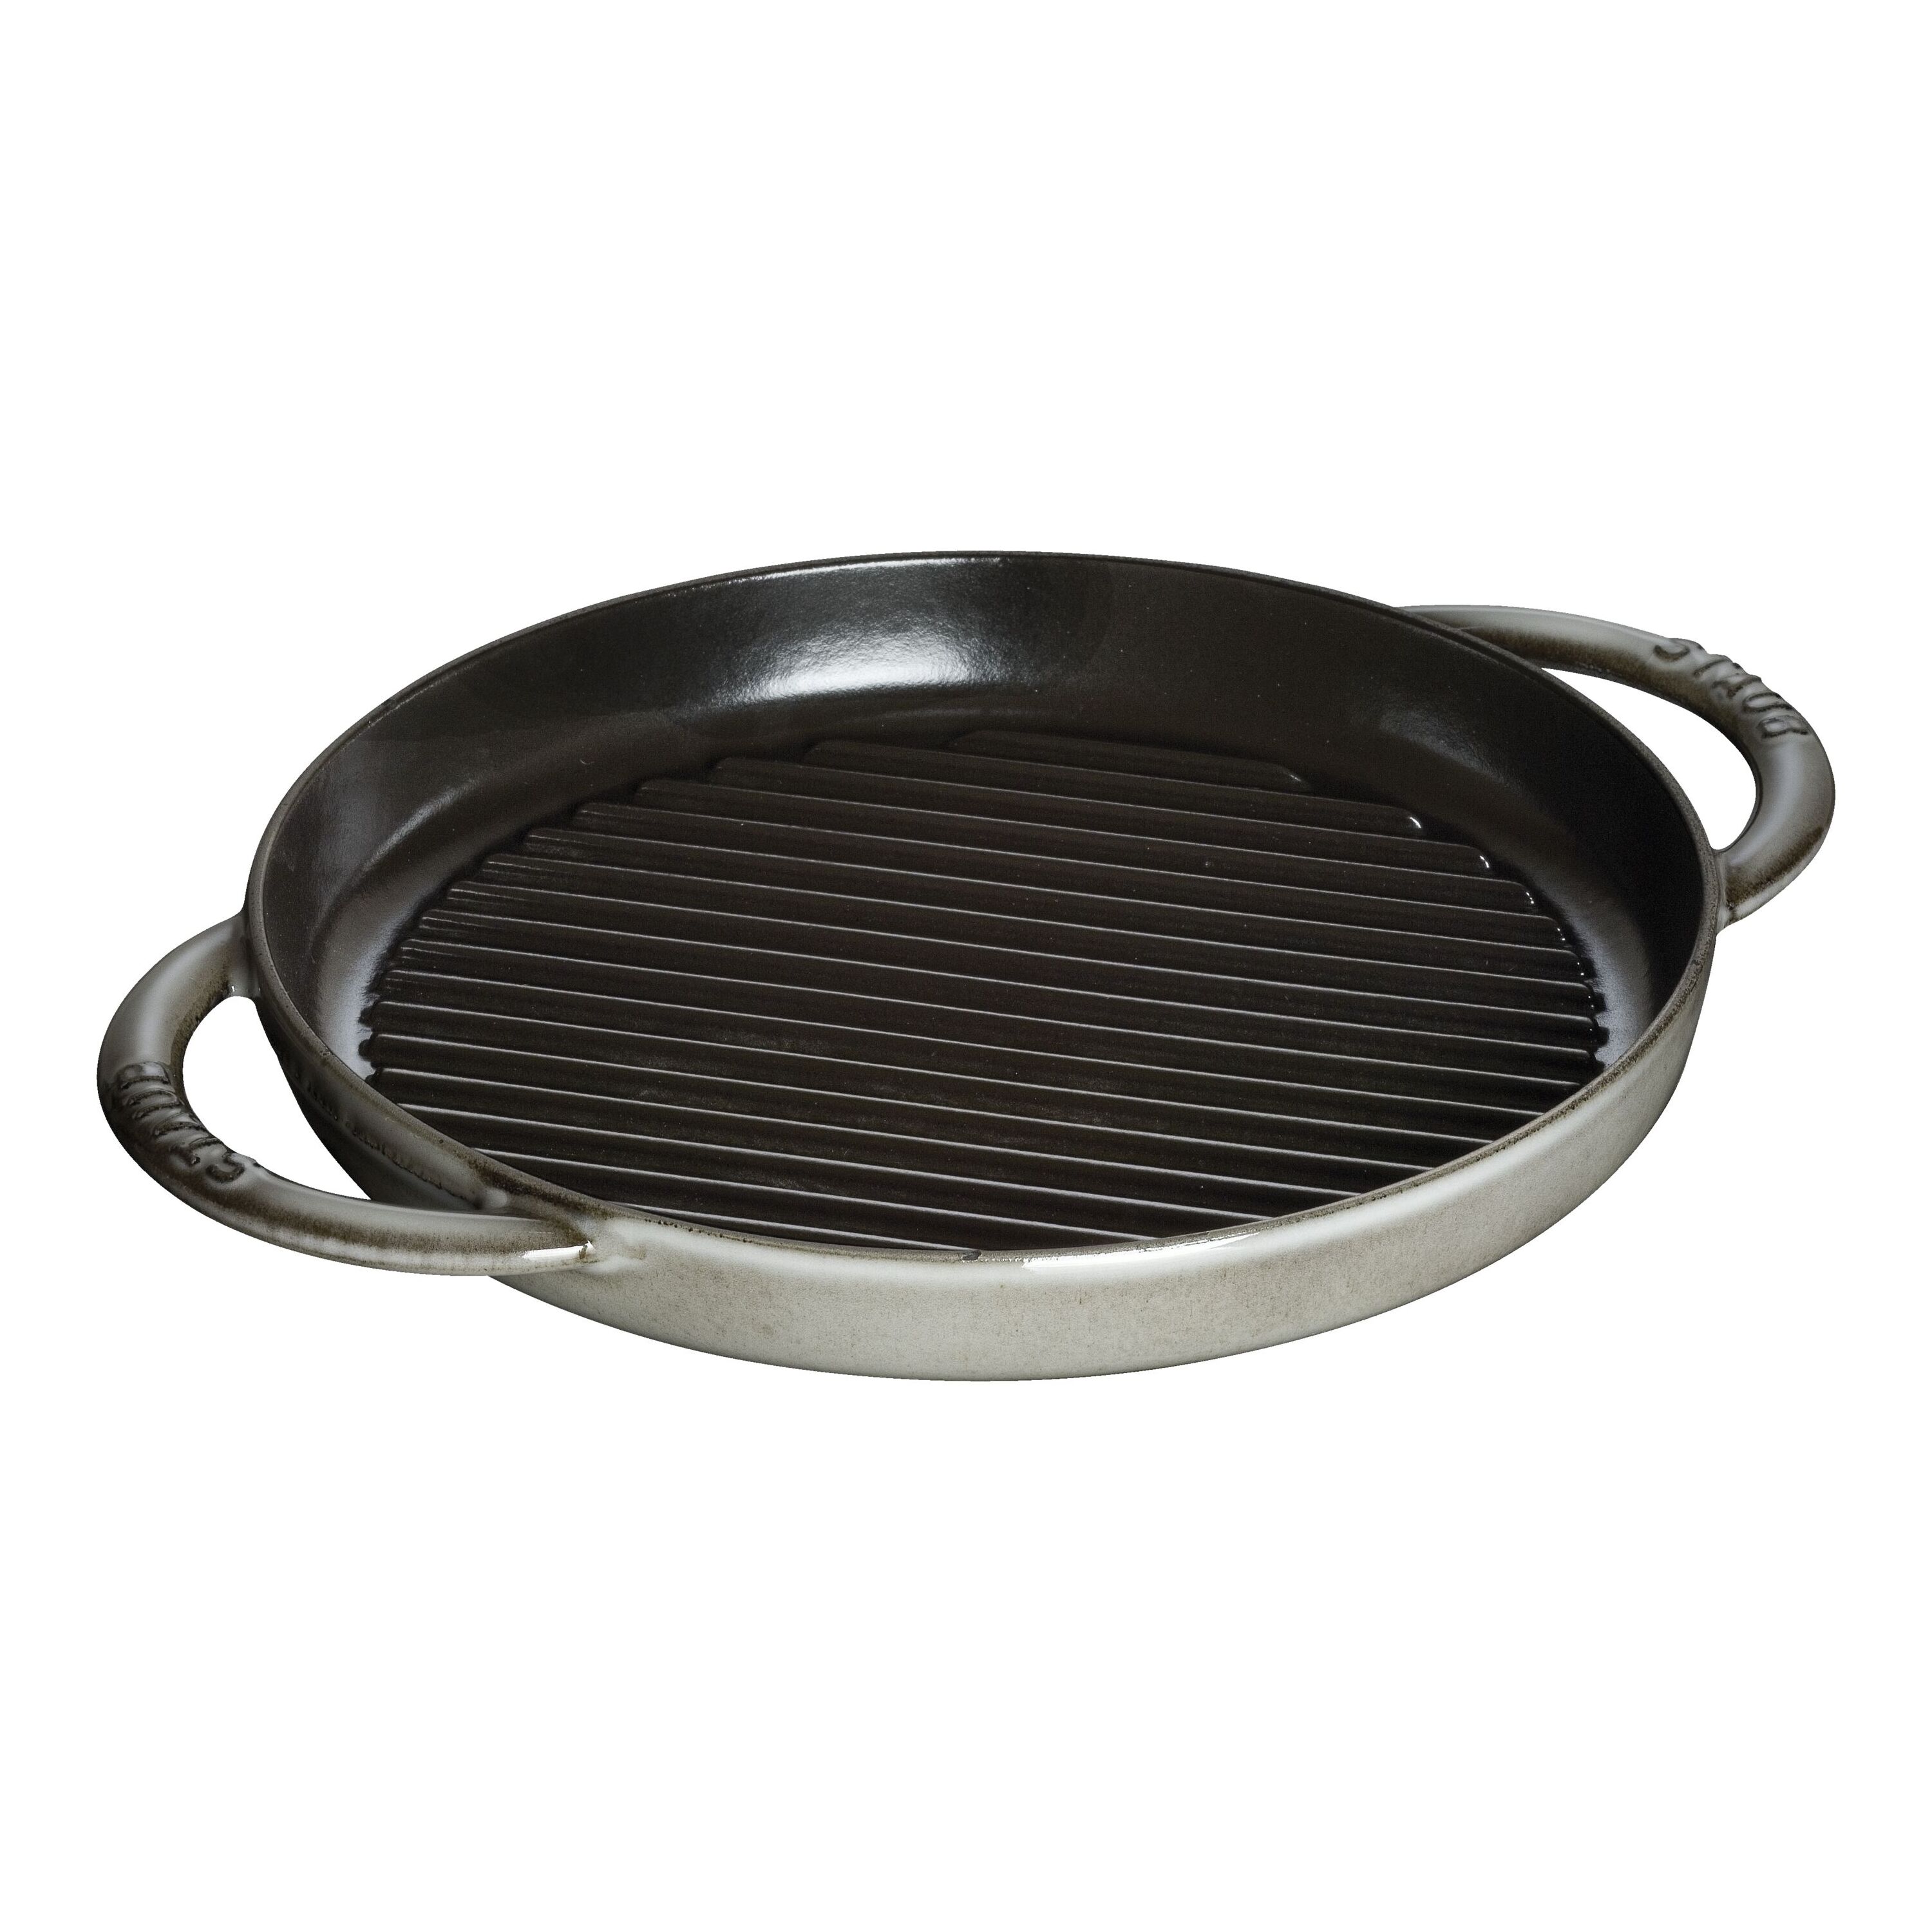 Order a Durable & Functional Nonstick Grill Pan for All Stove Top Types